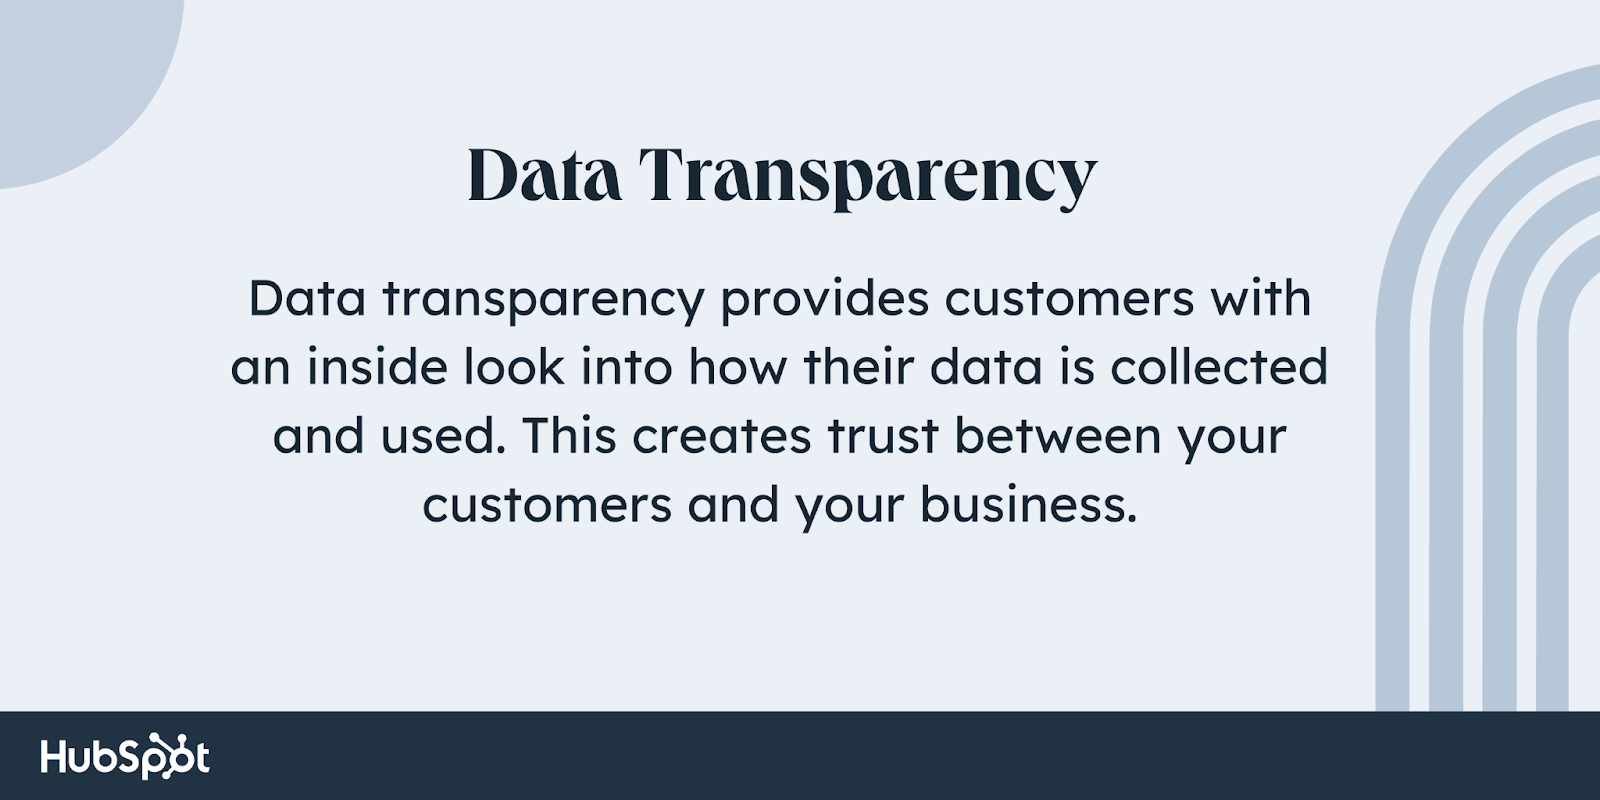 what is data transparency, data transparency provides customers with an inside look into how their data is collected and used